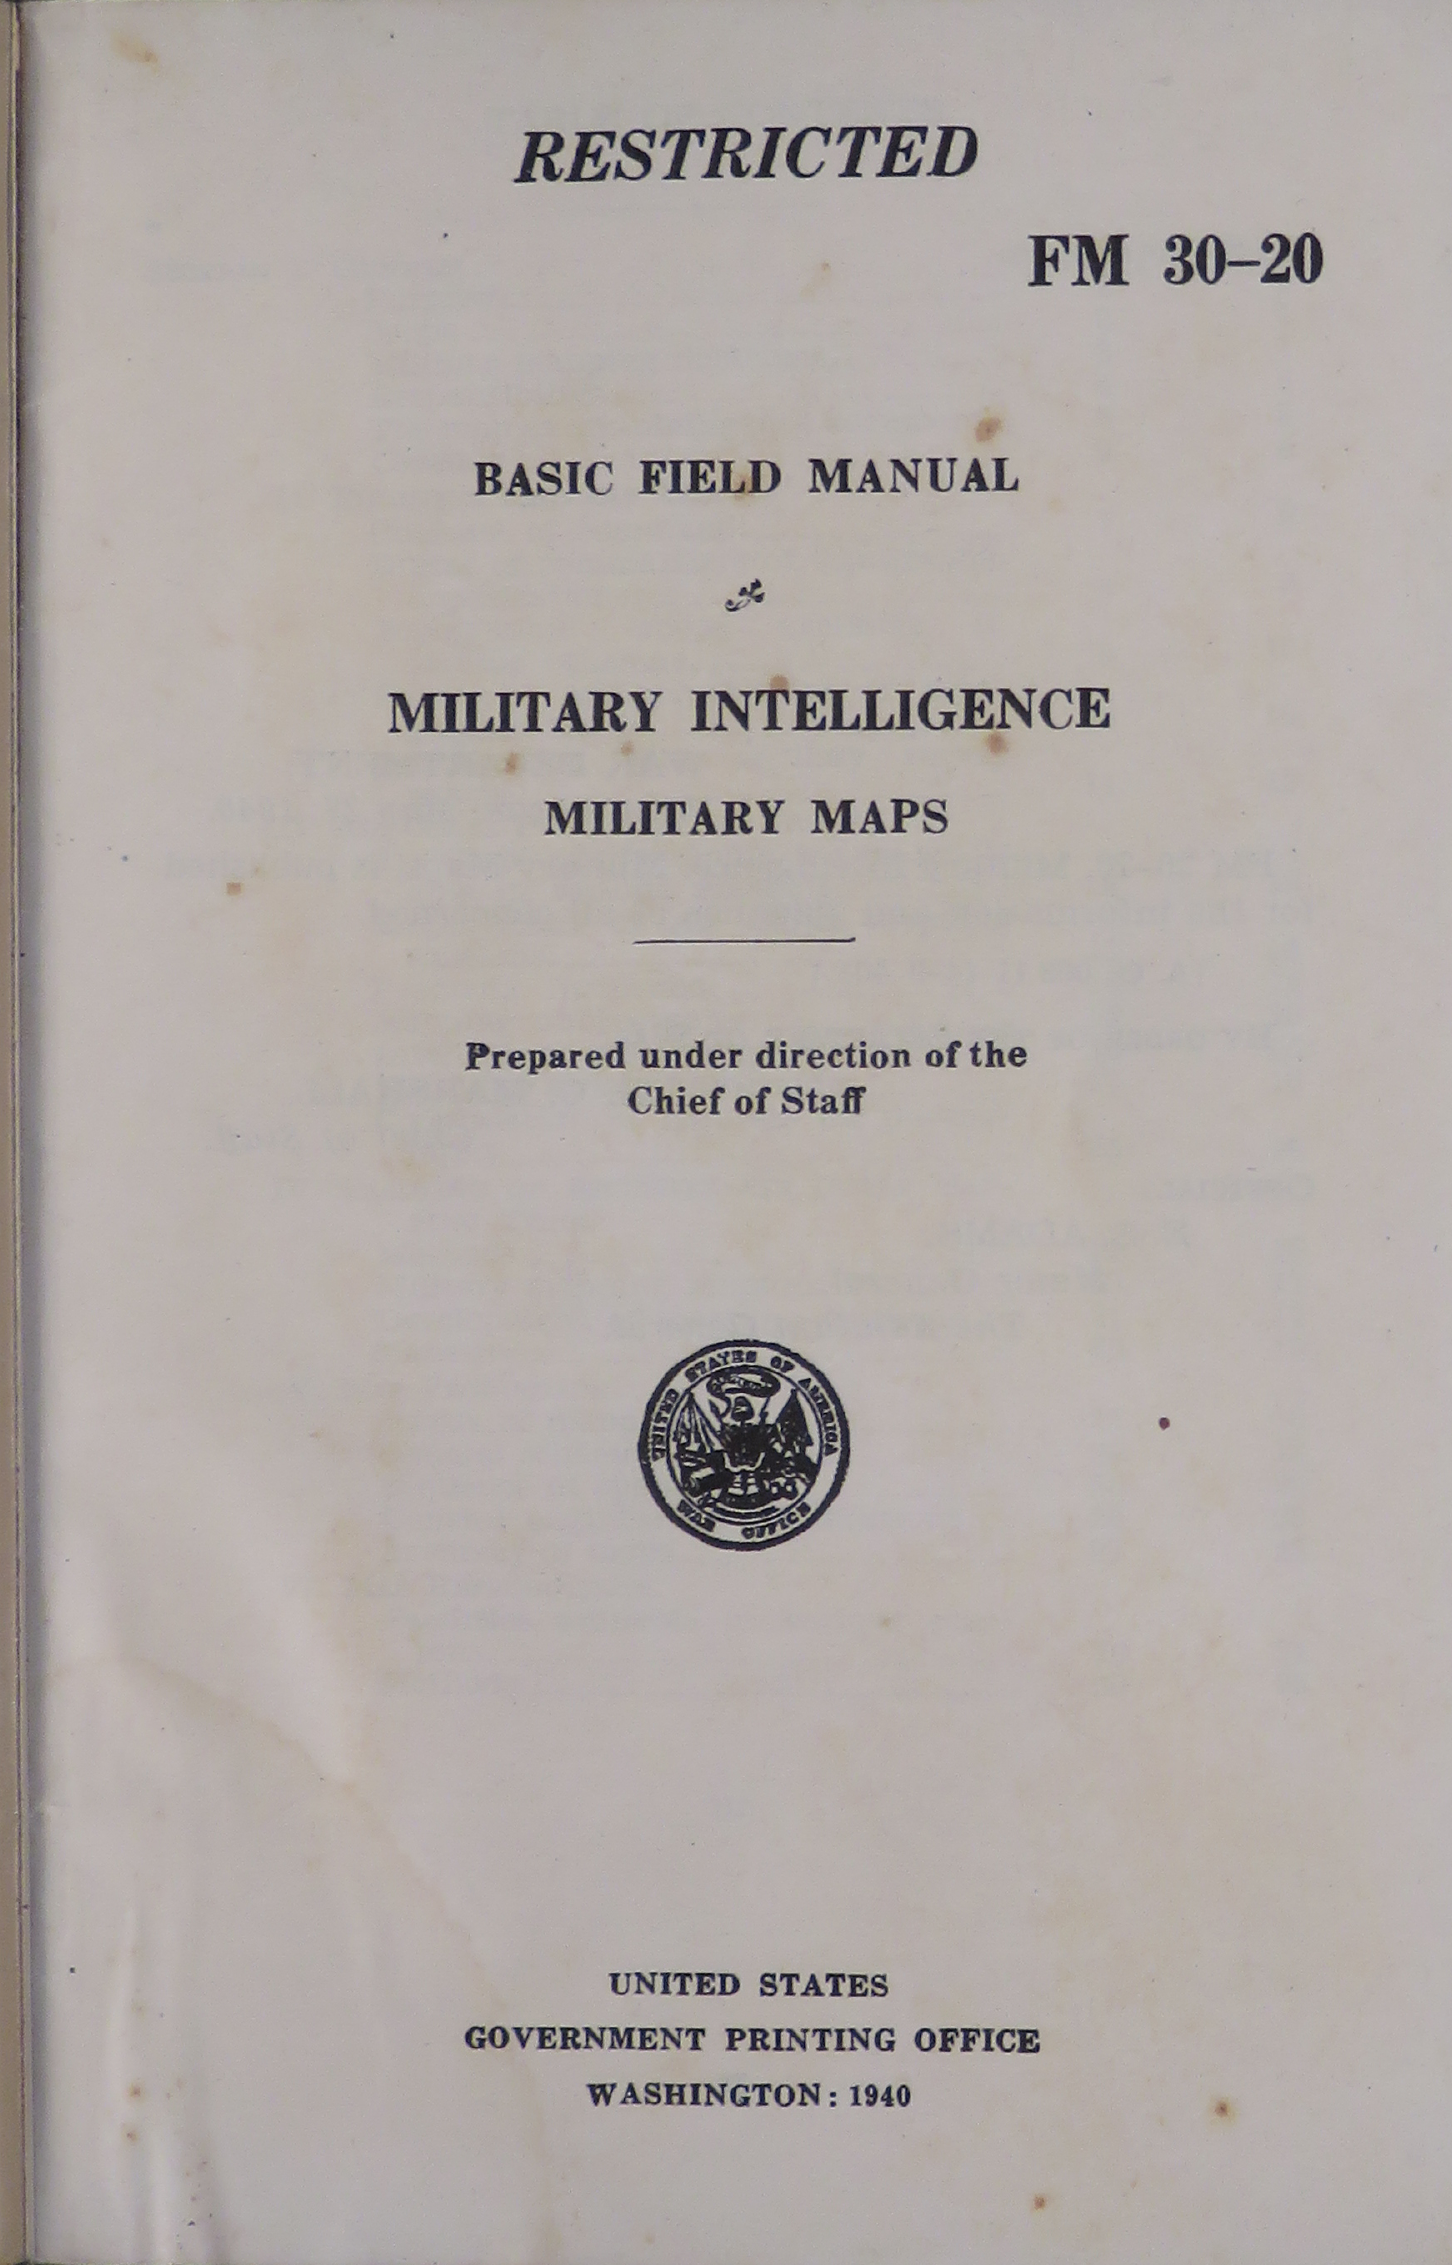 Sample page 3 from AirCorps Library document: Basic Field Manual for Military Intelligence Military Maps